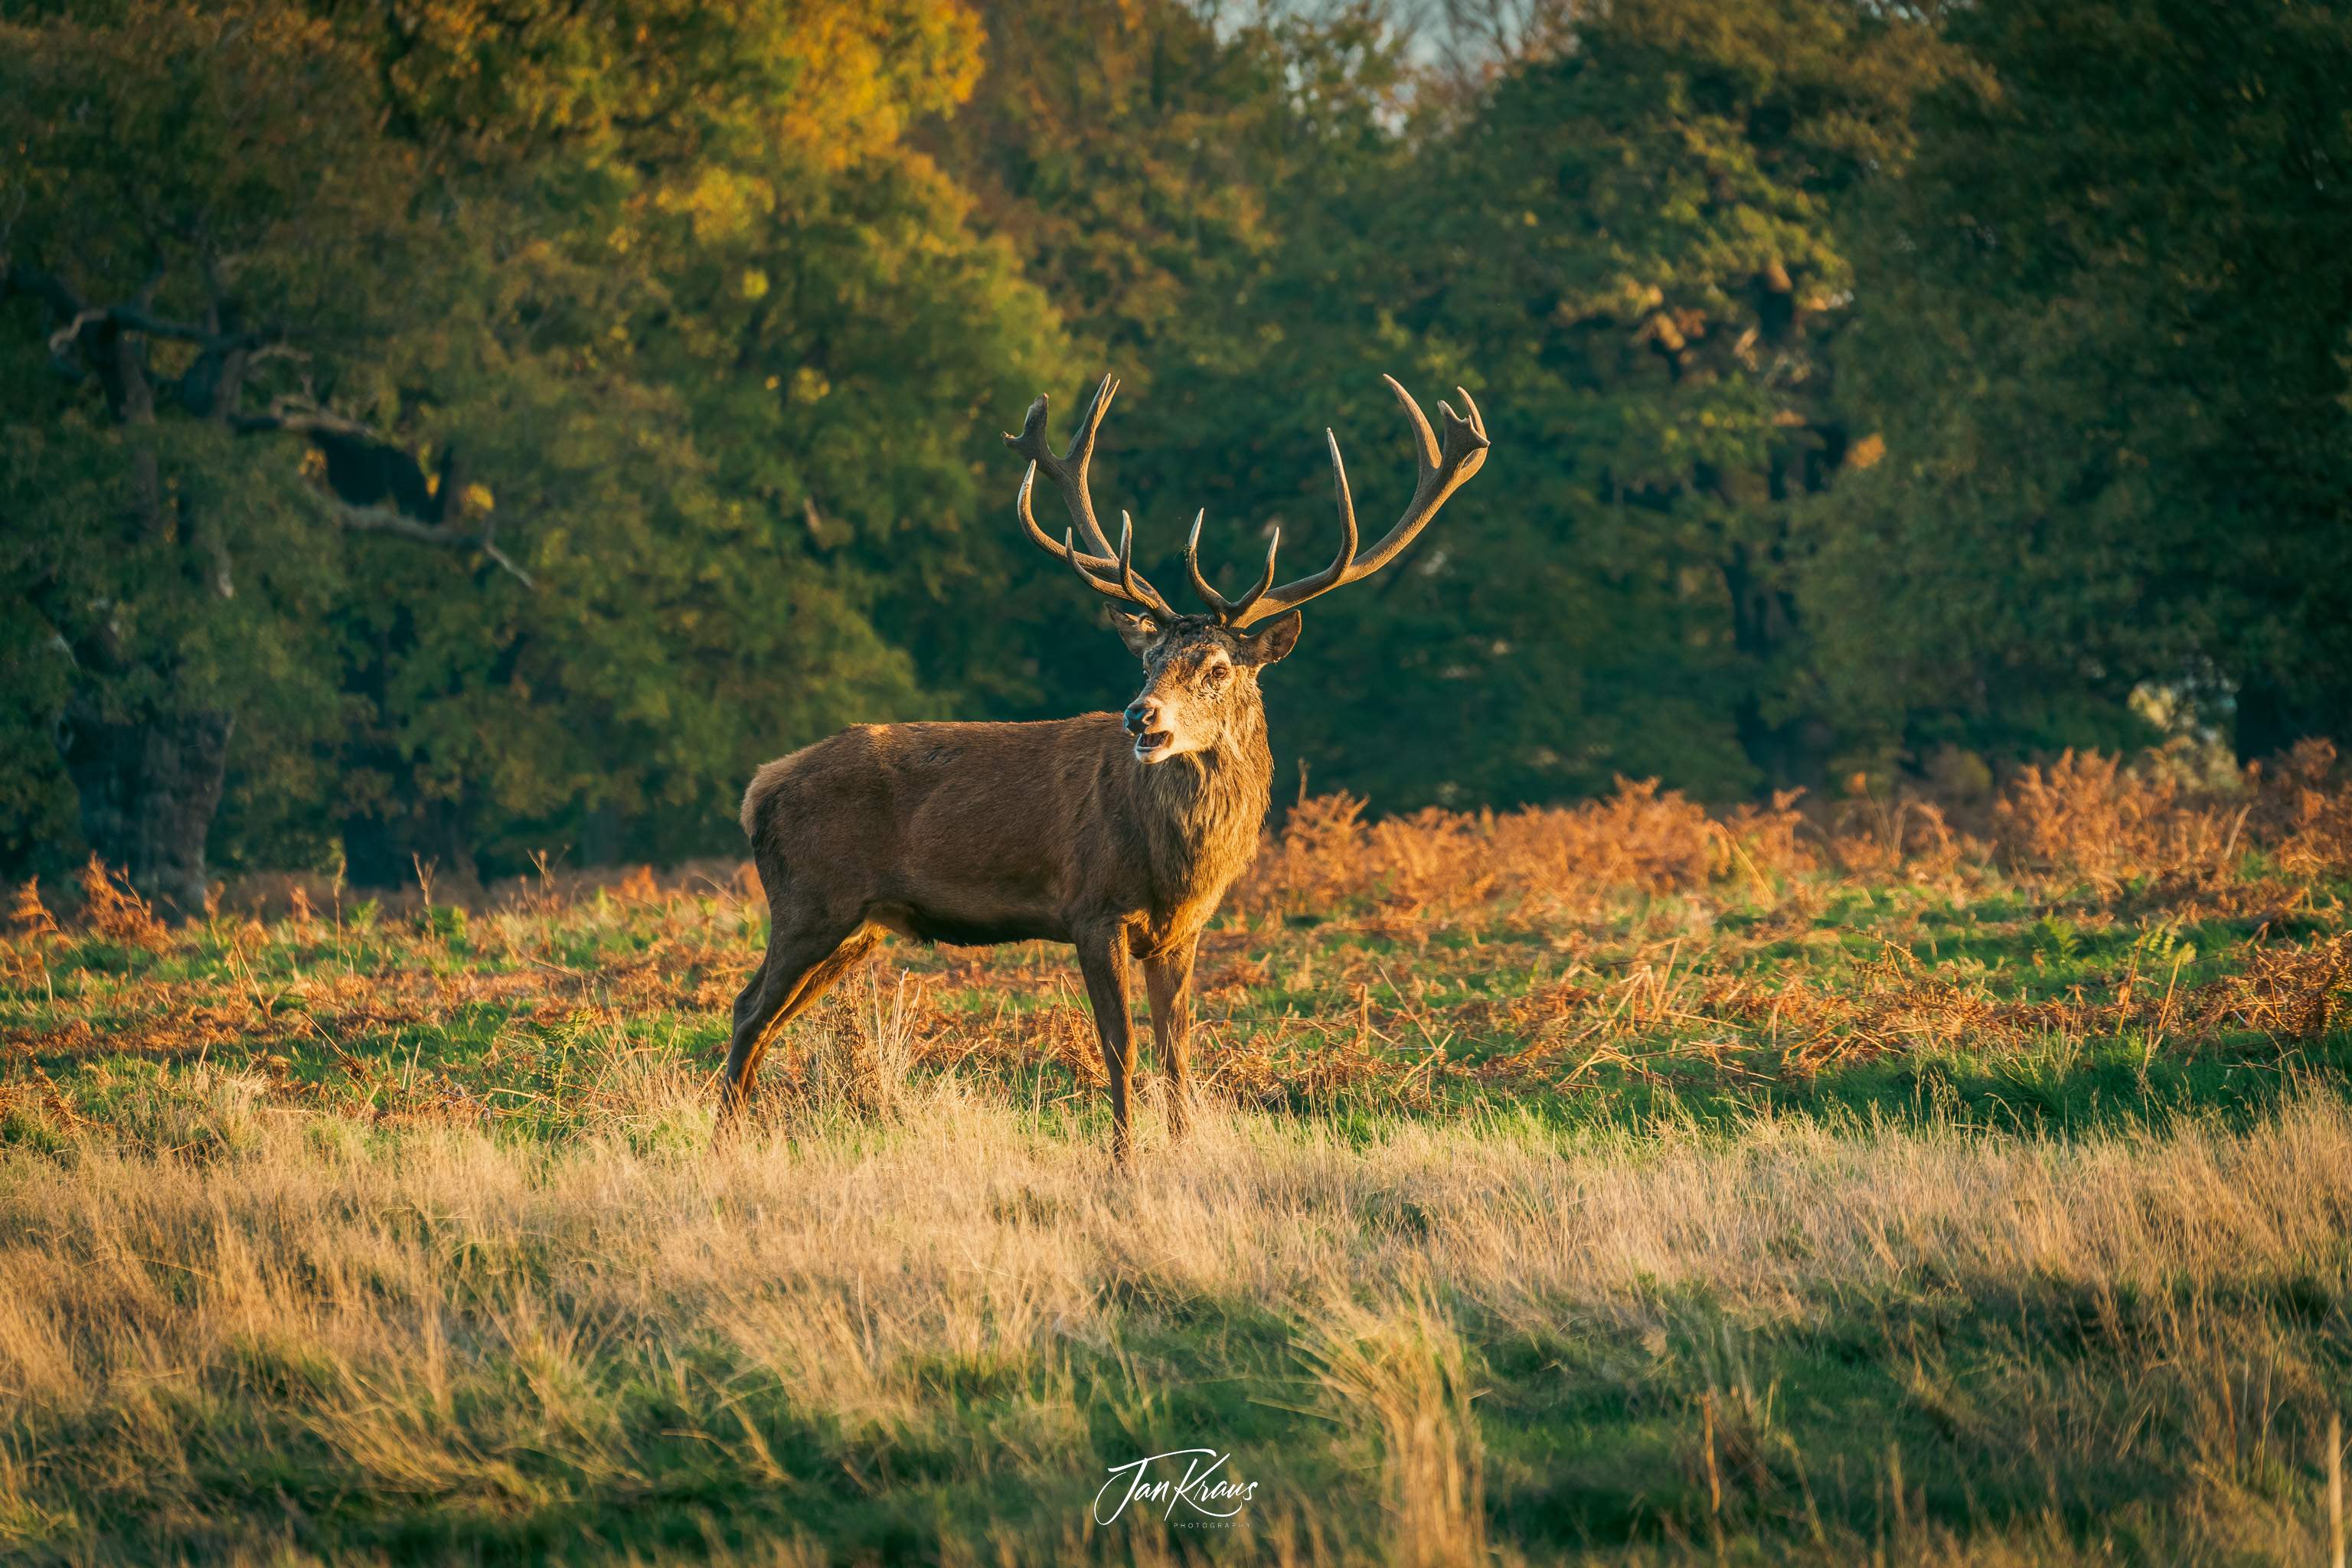 A red deer spotted in Richmond Park, London, UK